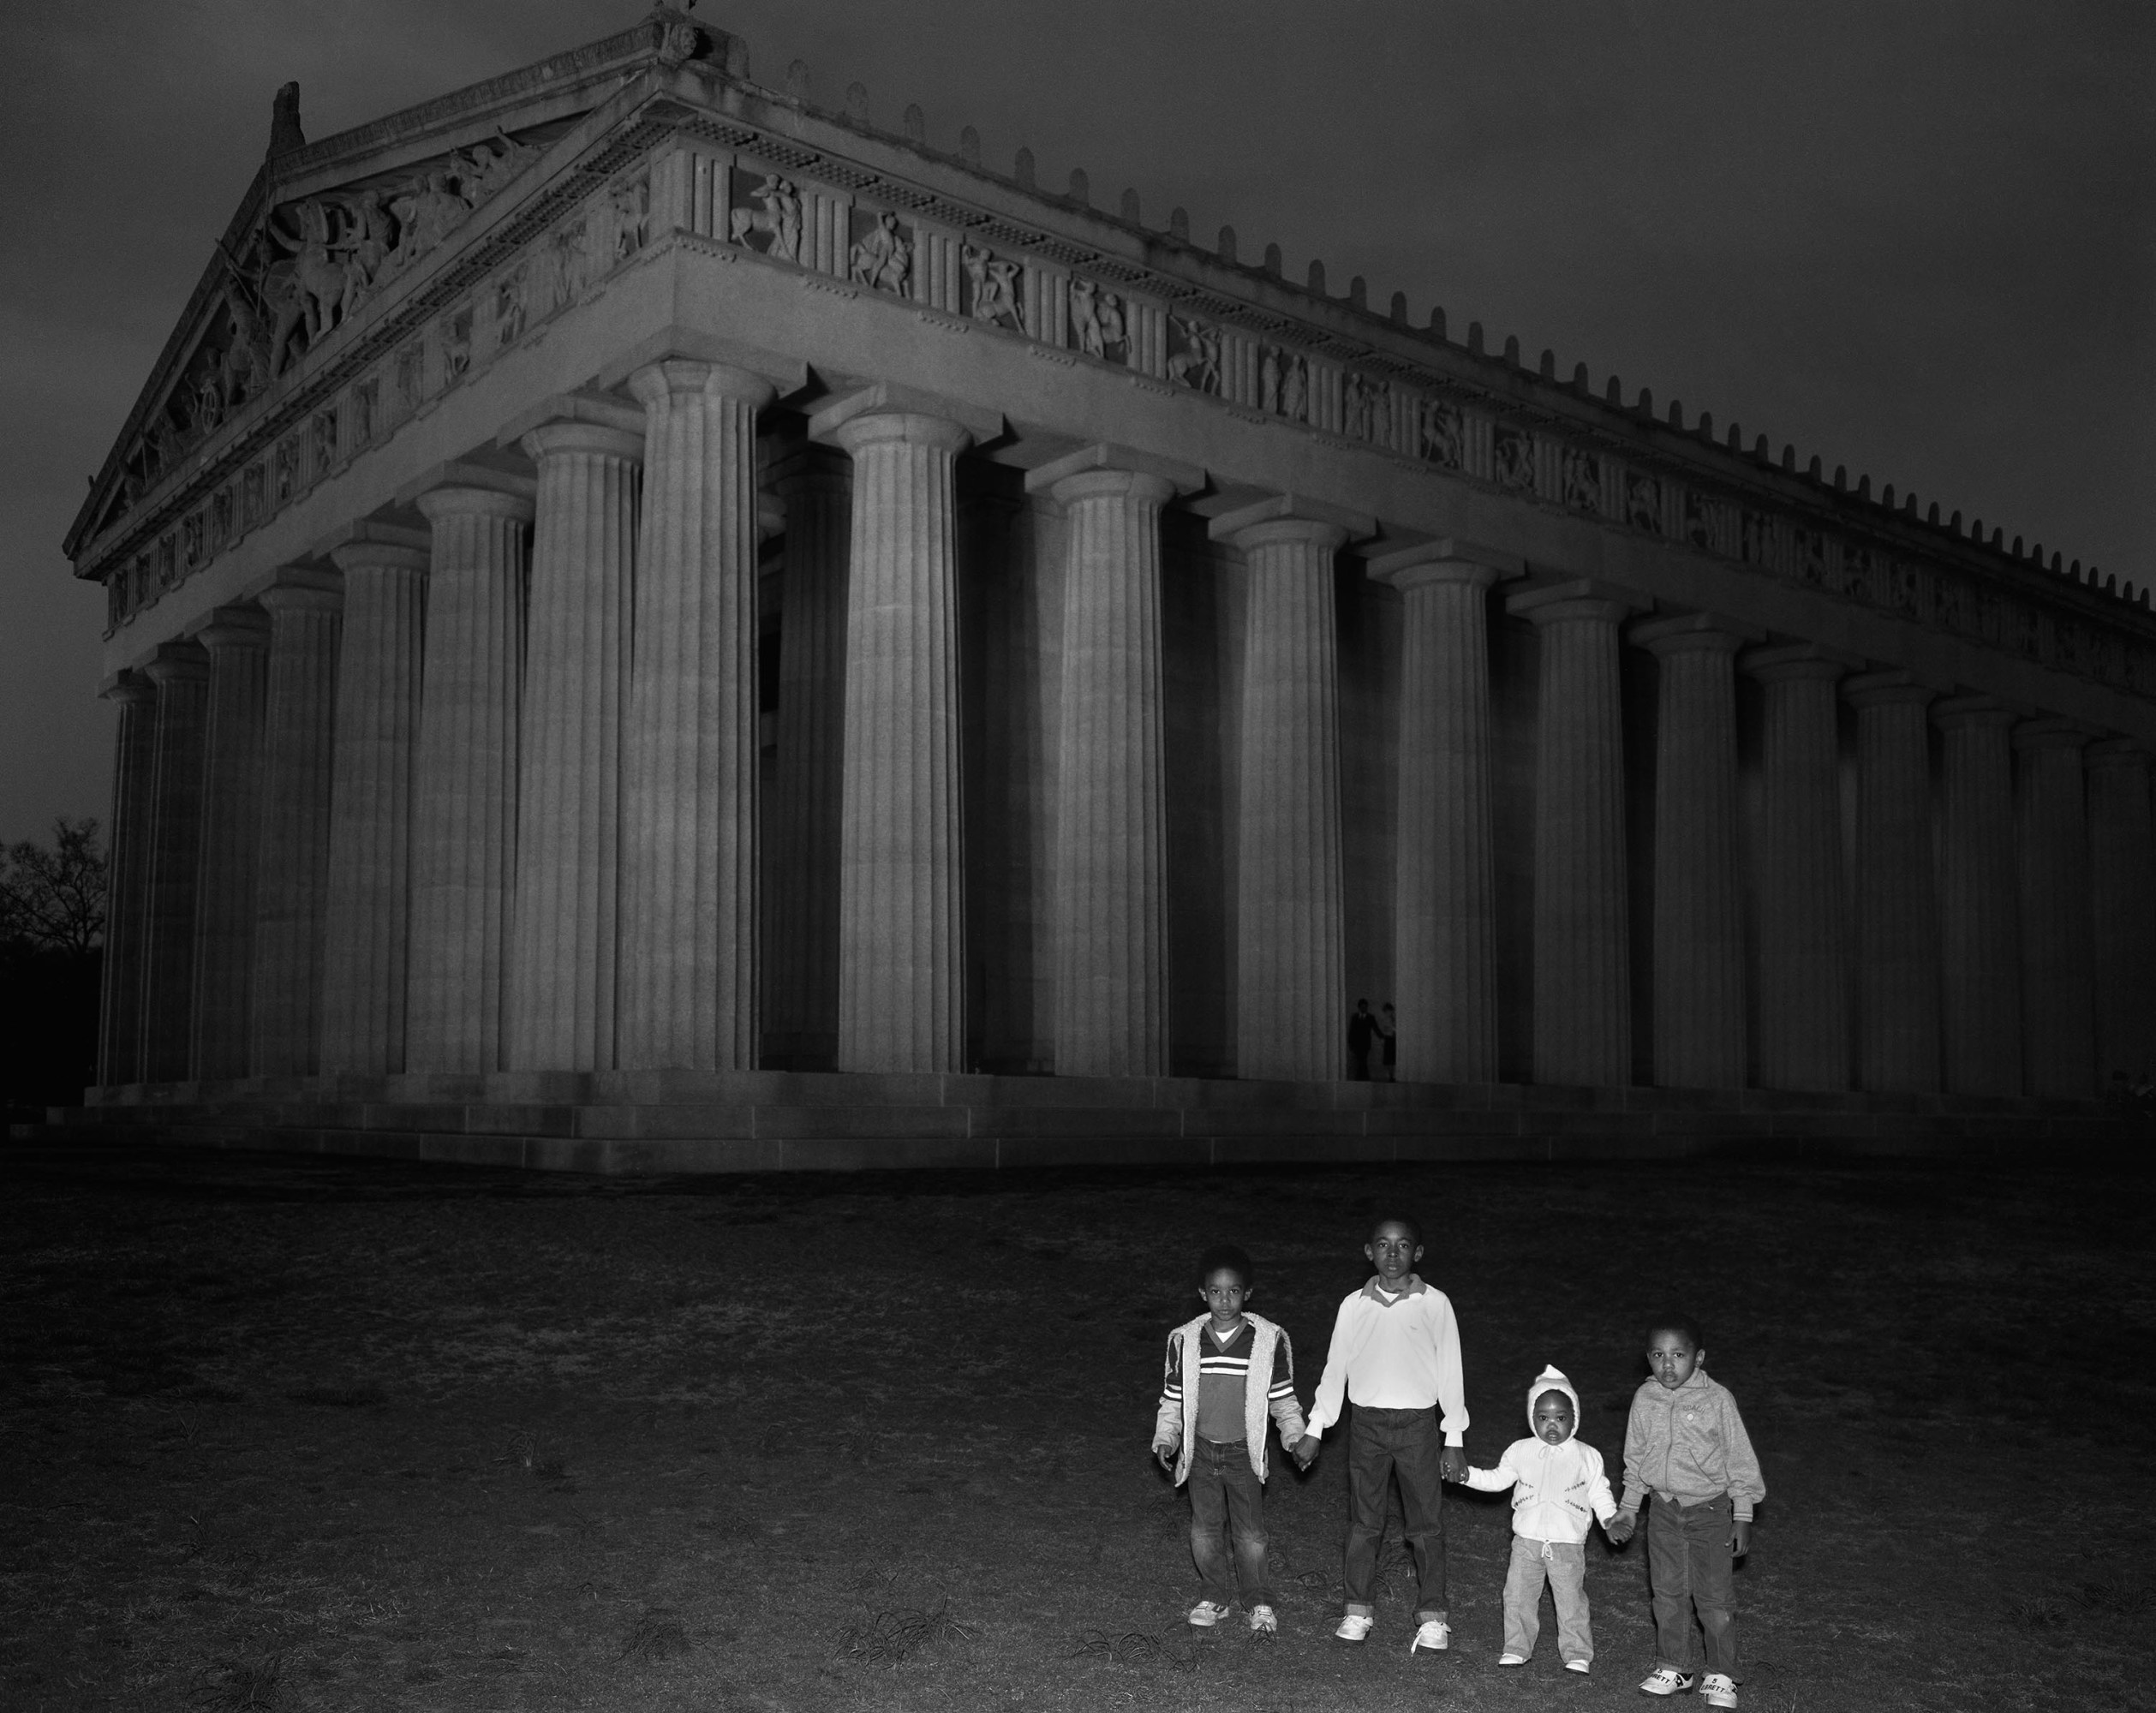 A strong flash lights four children hold hands in front of the darkened Parthenon in Nashville.